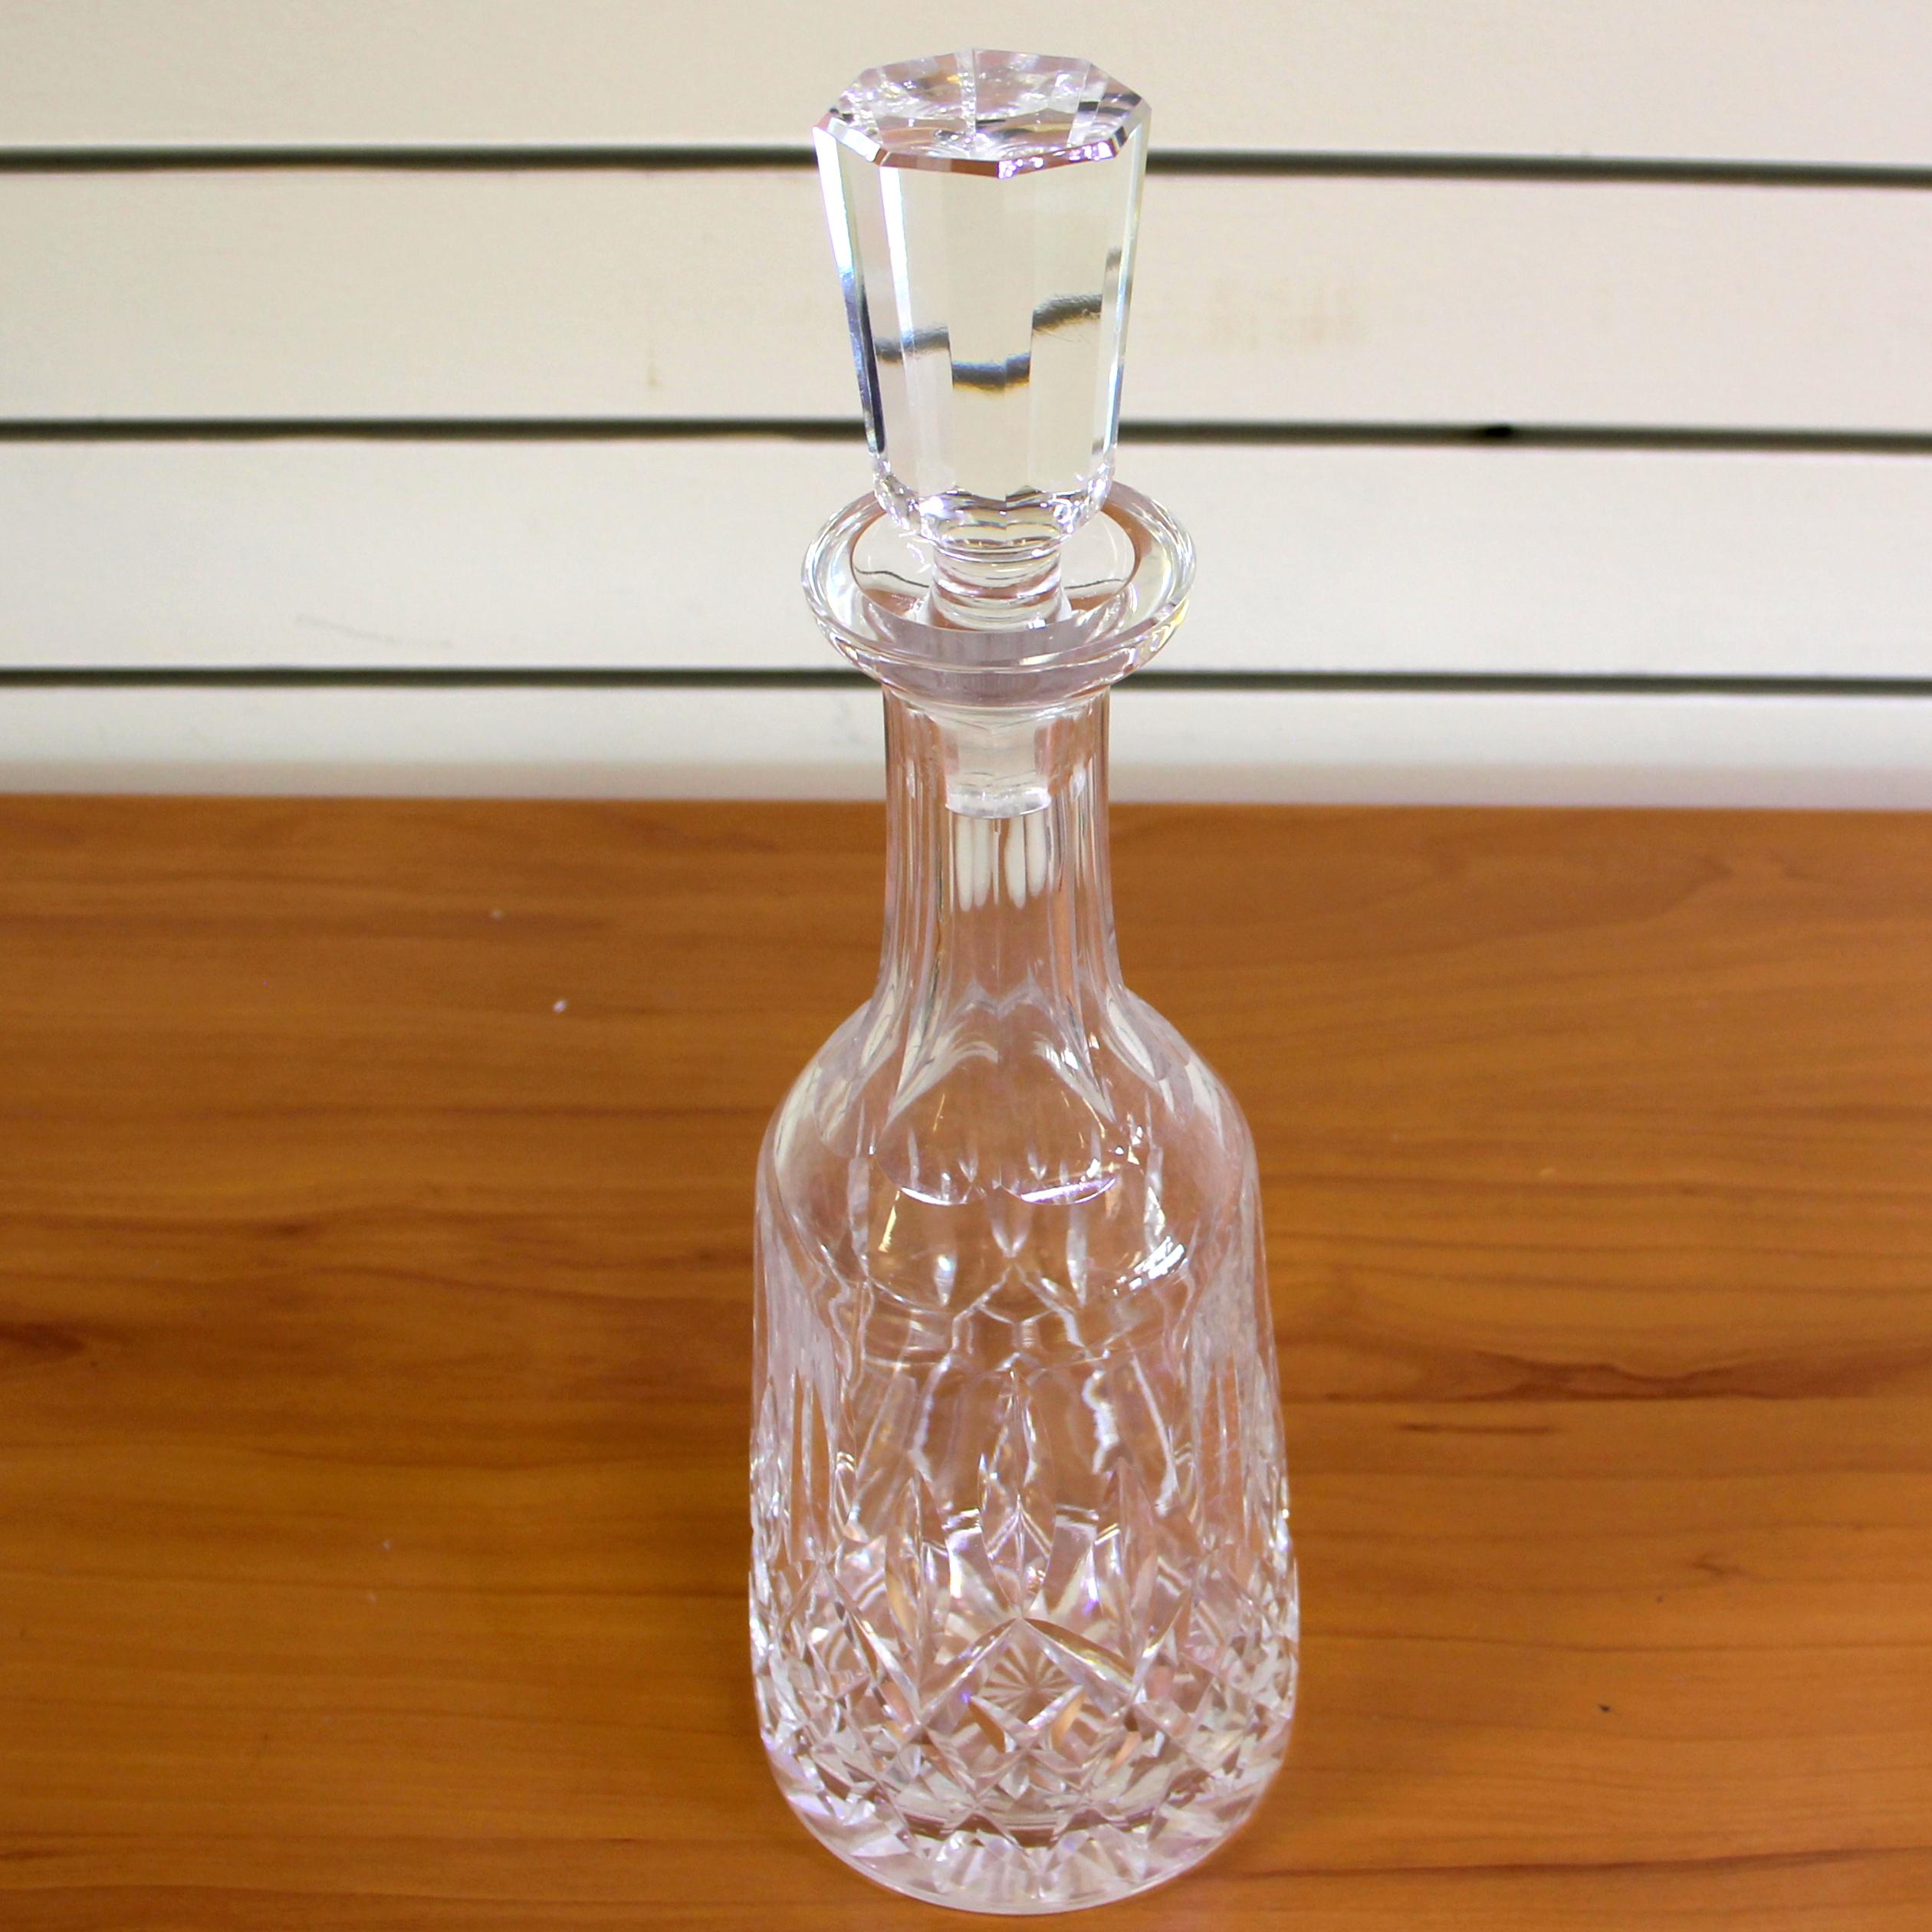 Waterford Lismore Decanter